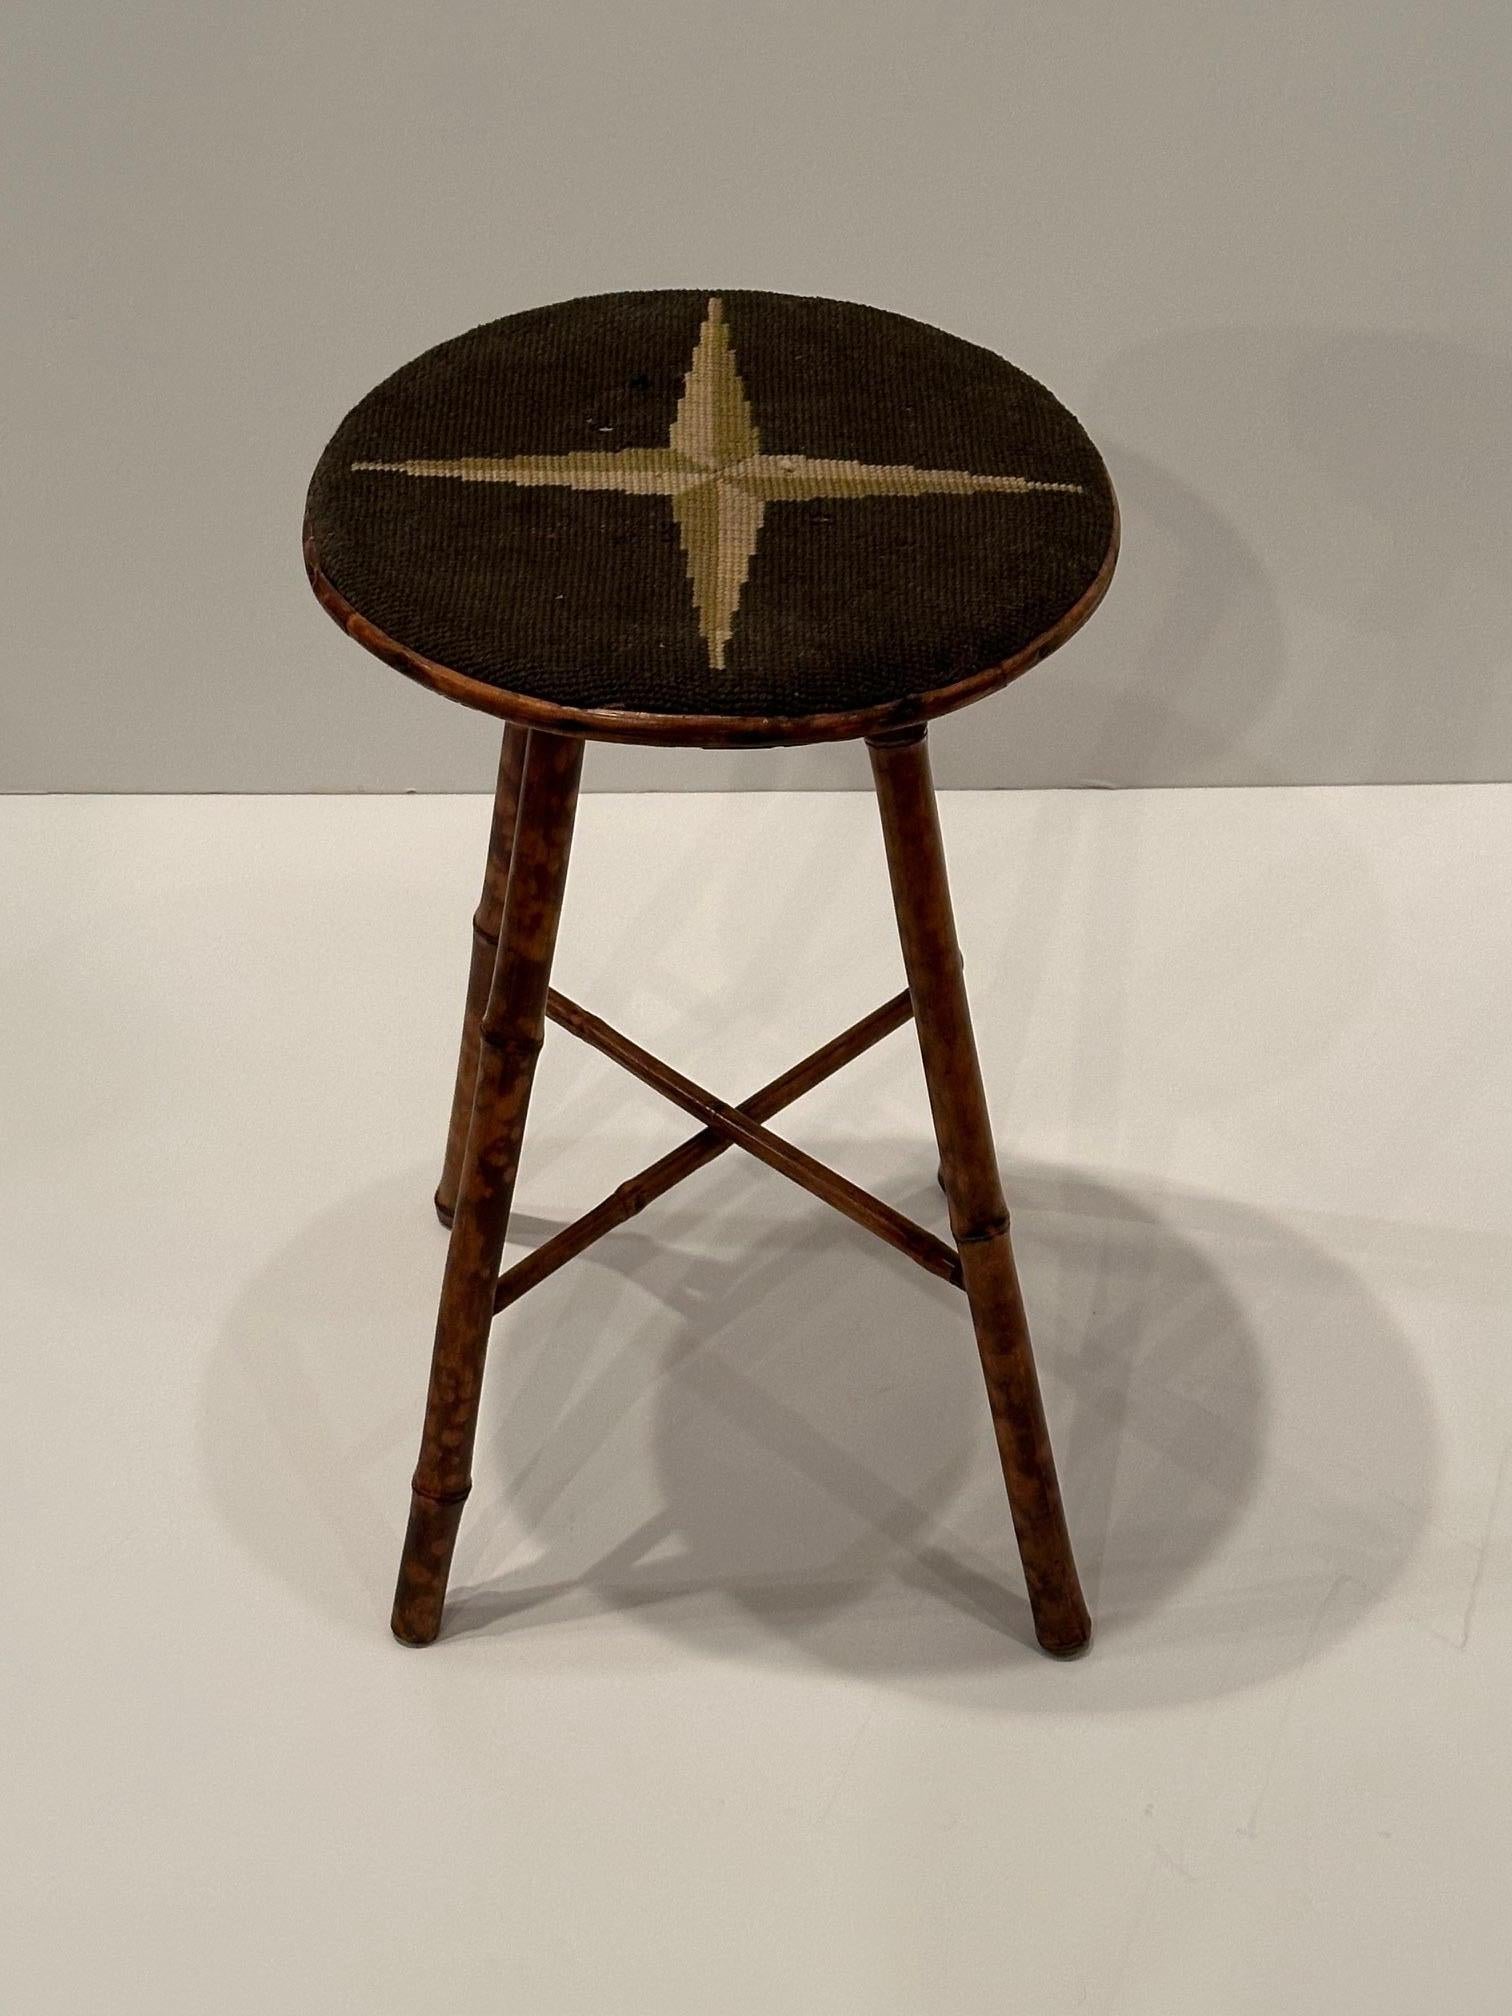 Early 20th Century Antique American Bamboo Stool with Original Needlepoint Seat For Sale